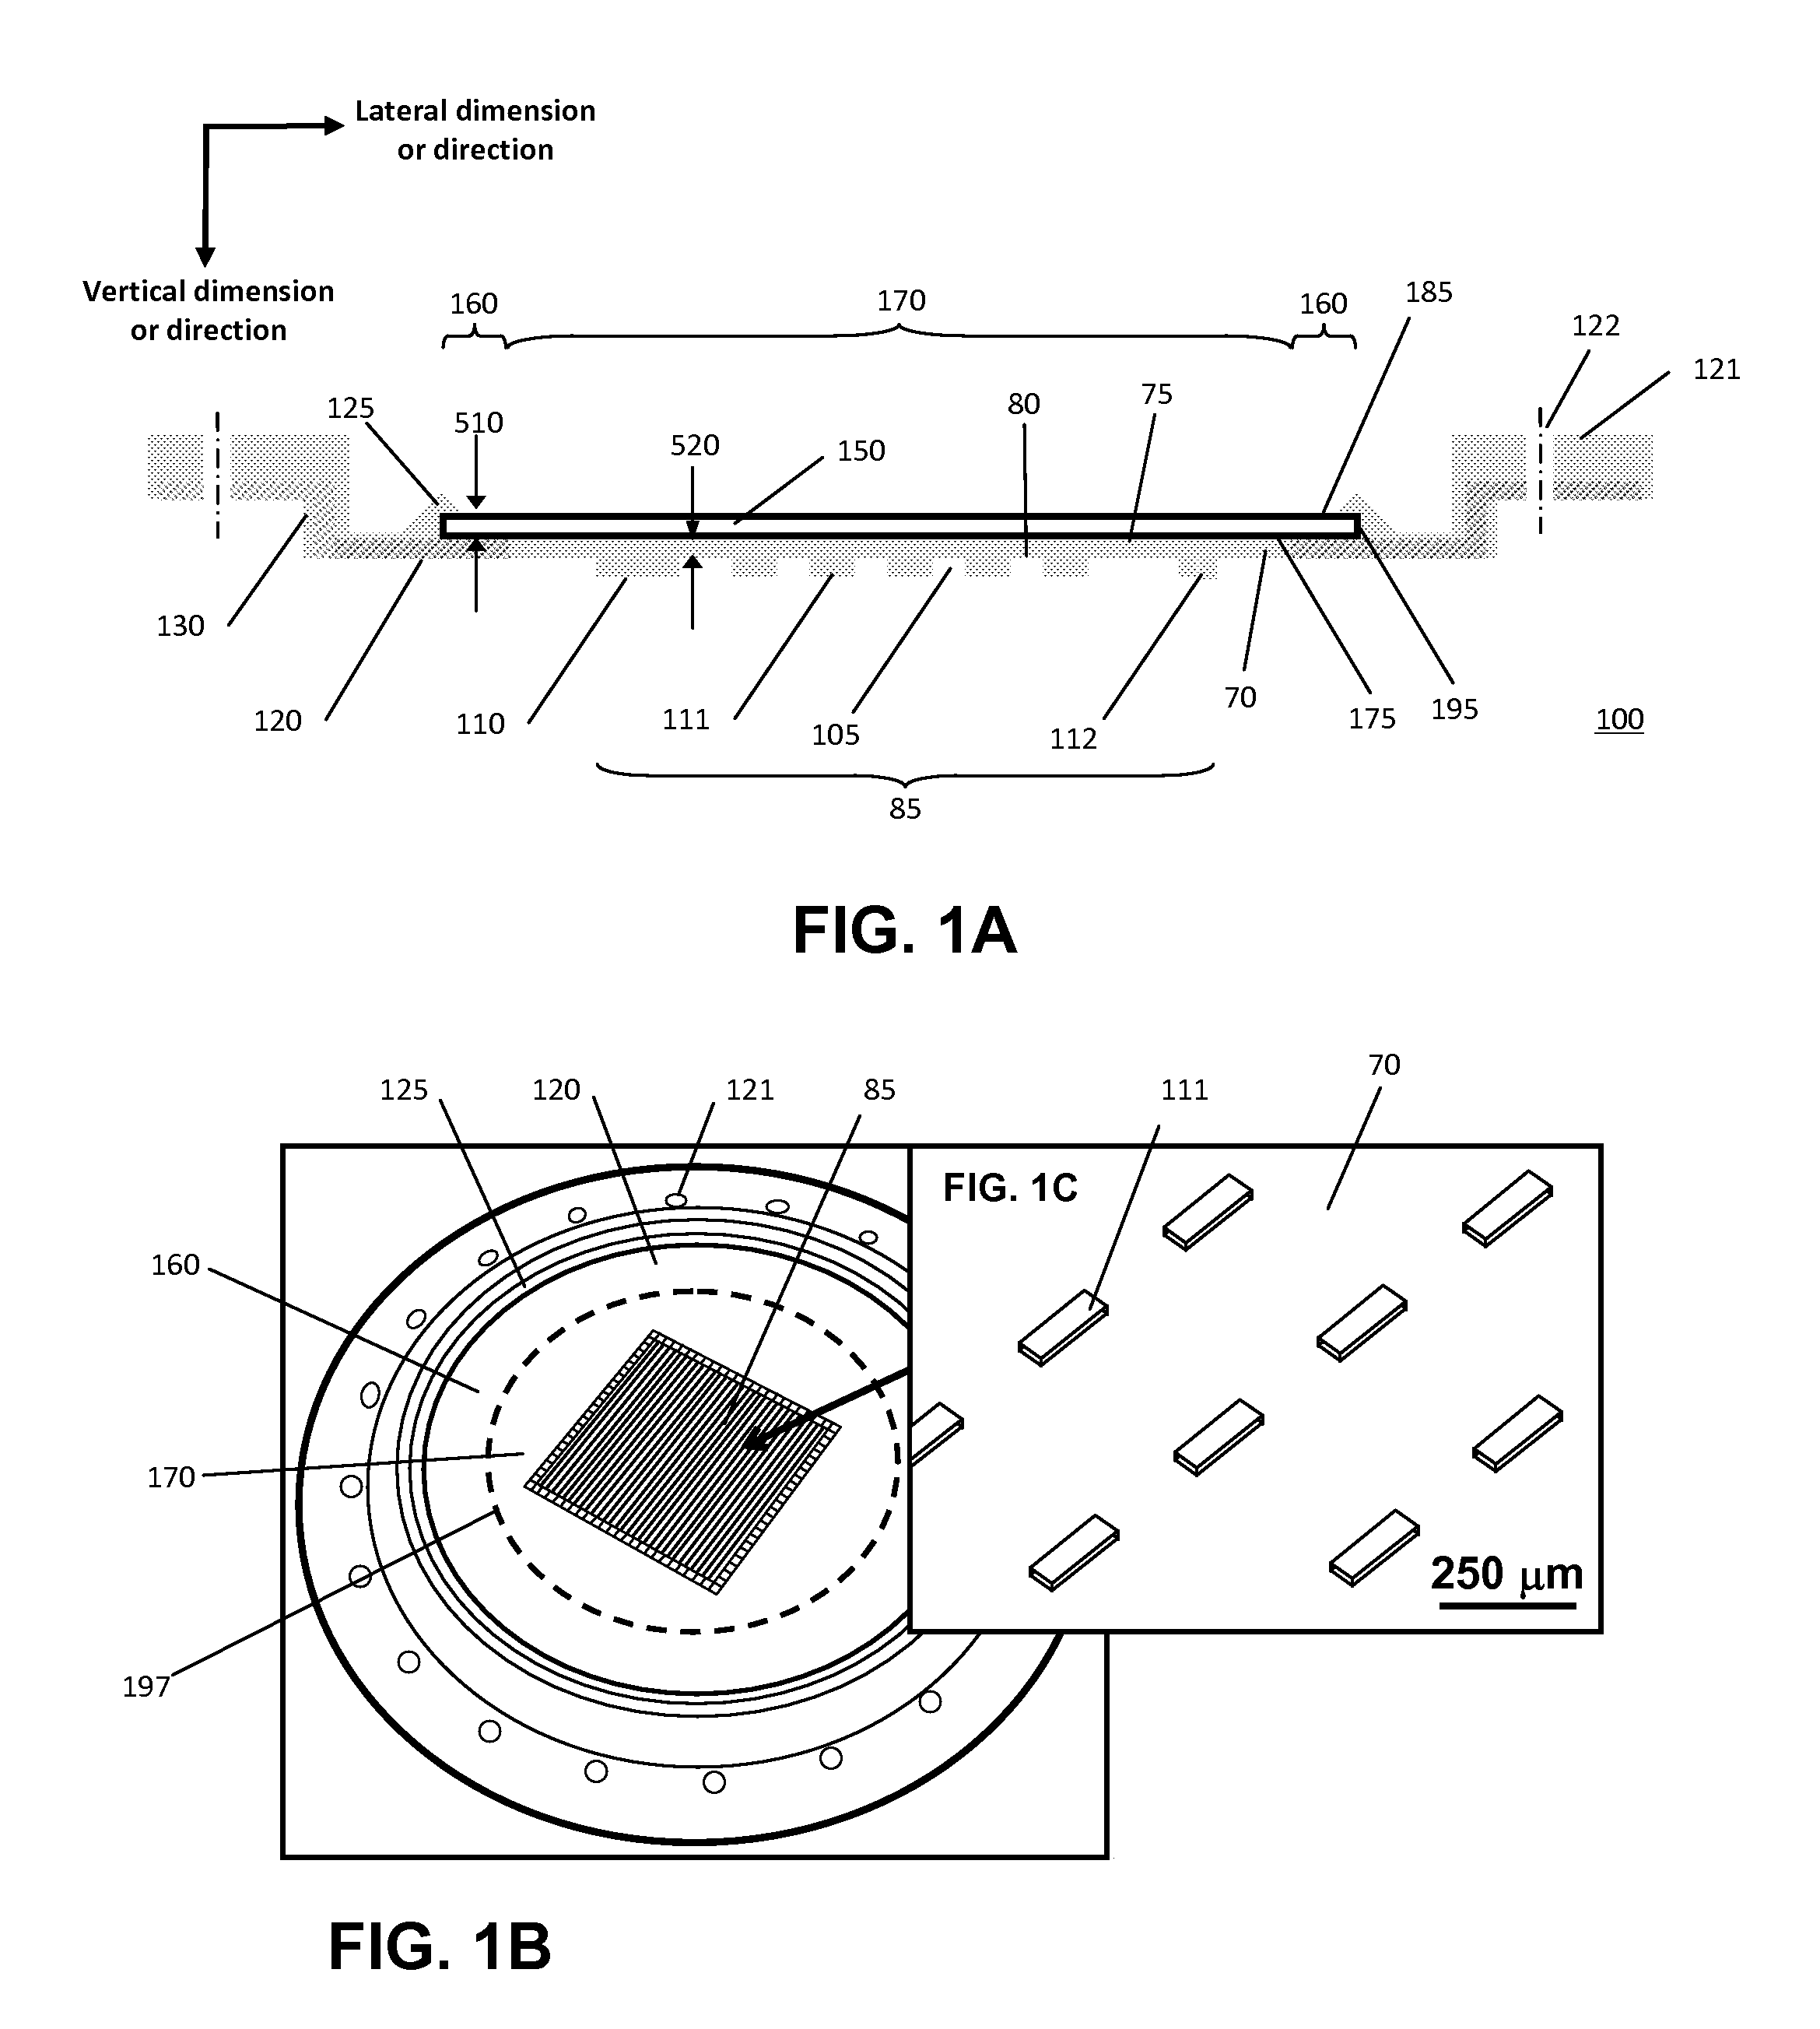 Reinforced Composite Stamp for Dry Transfer Printing of Semiconductor Elements